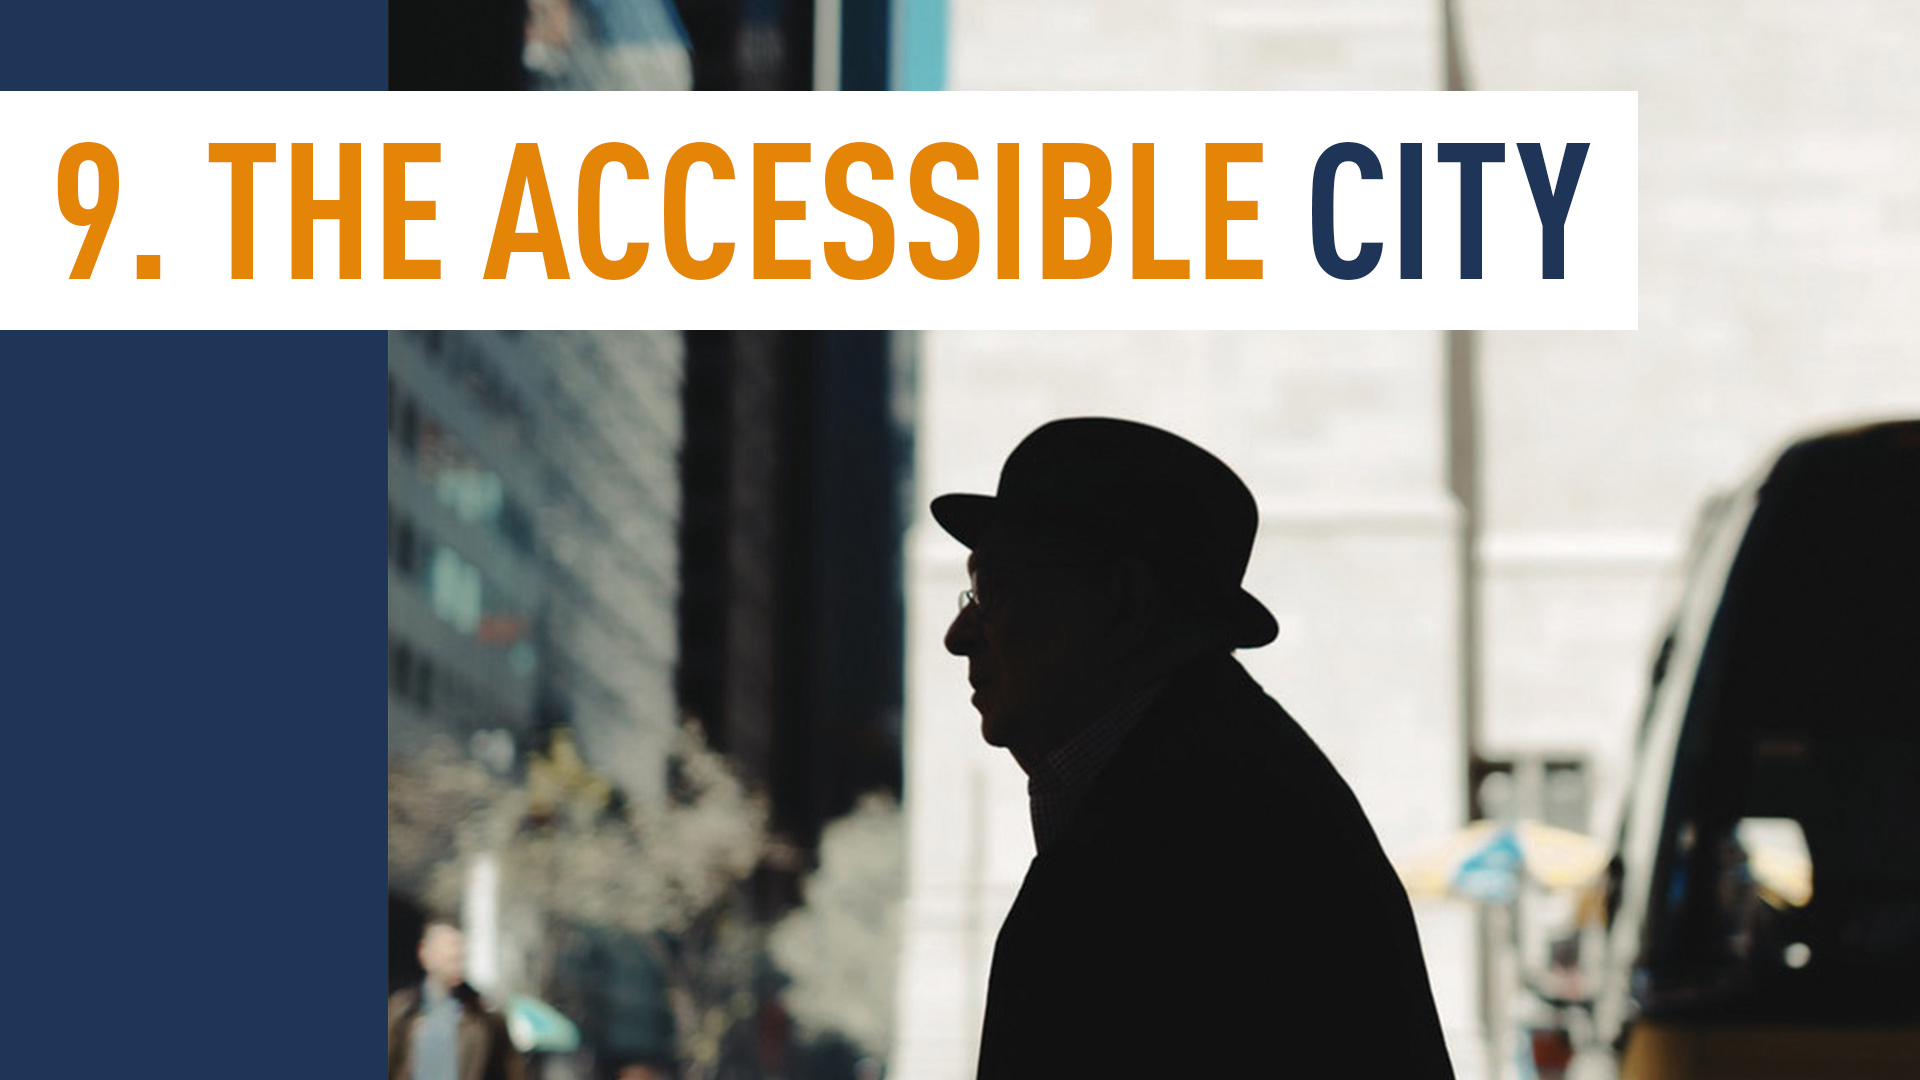 THE ACCESSIBLE CITY